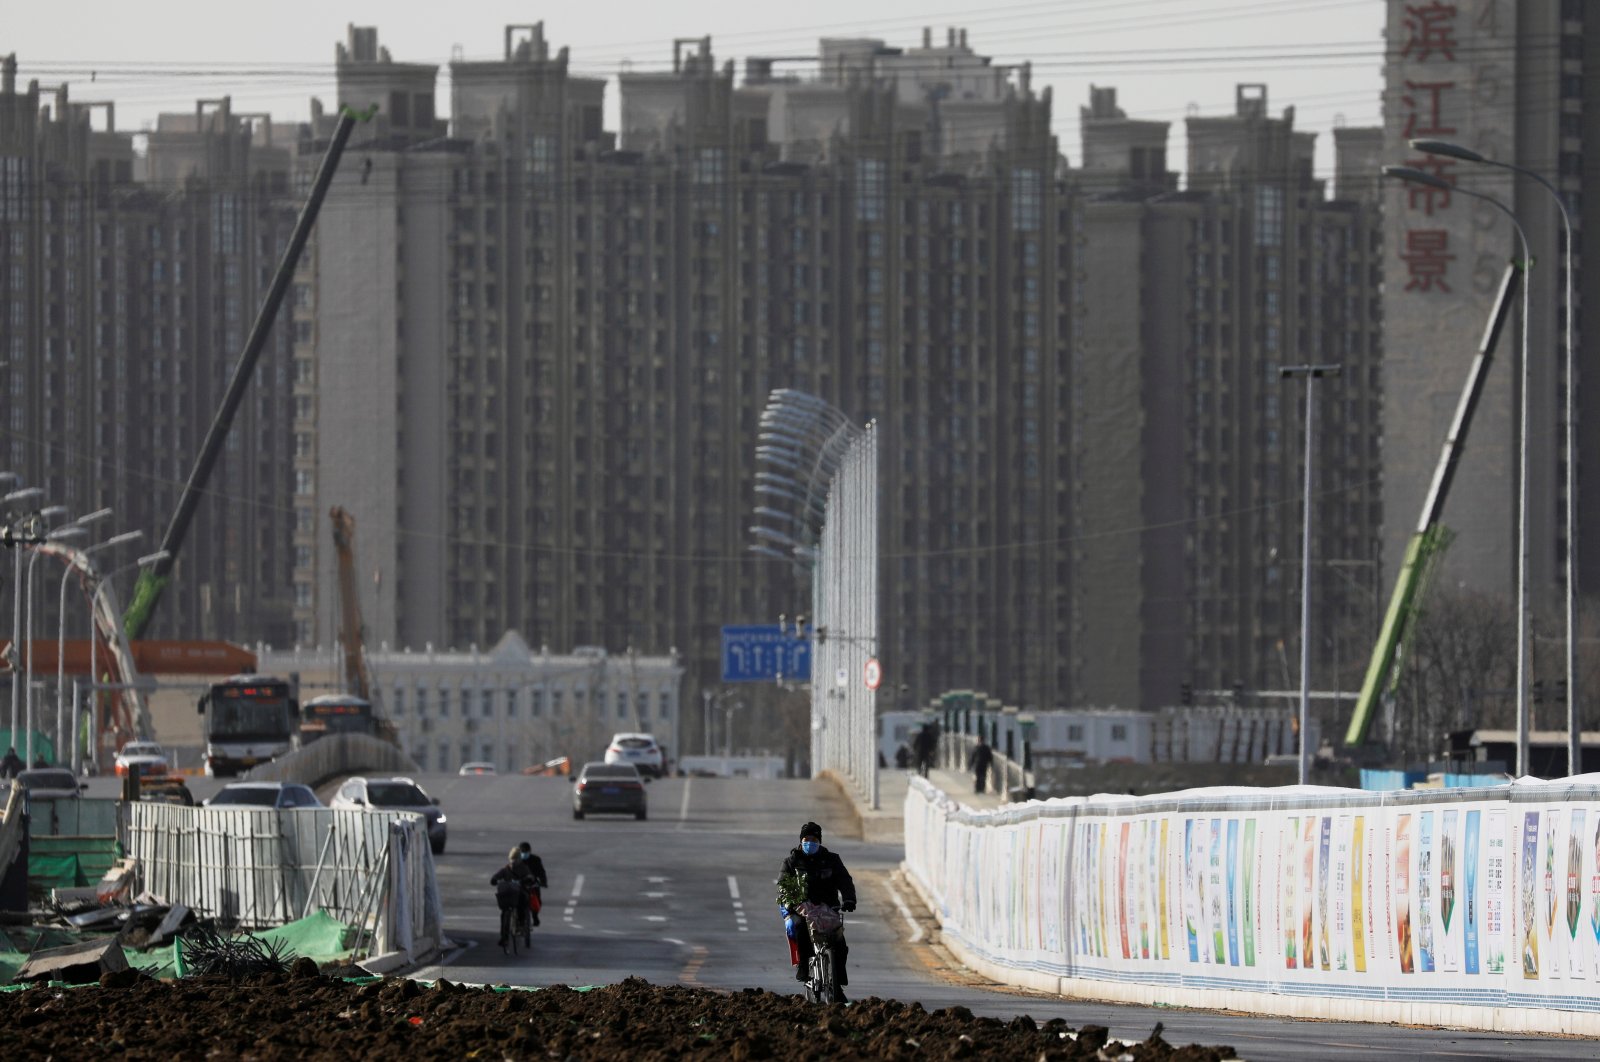 A man rides a bicycle next to a construction site near residential buildings in Beijing, China, Jan. 13, 2021. (Reuters Photo)